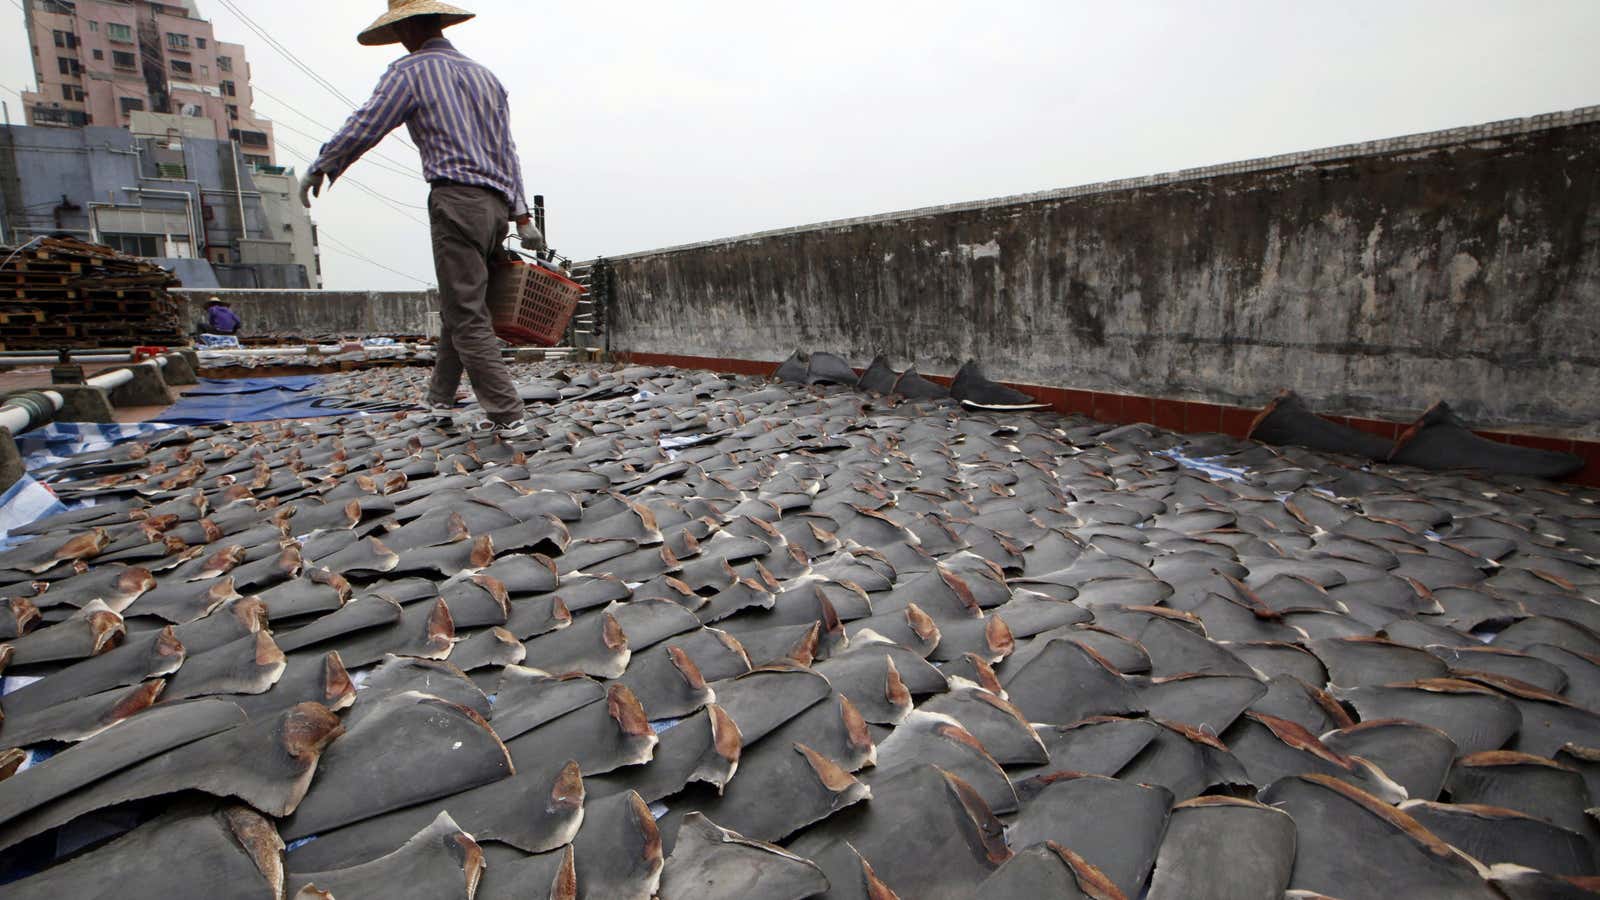 Demand for shark-fin soup drives global poaching and smuggling.